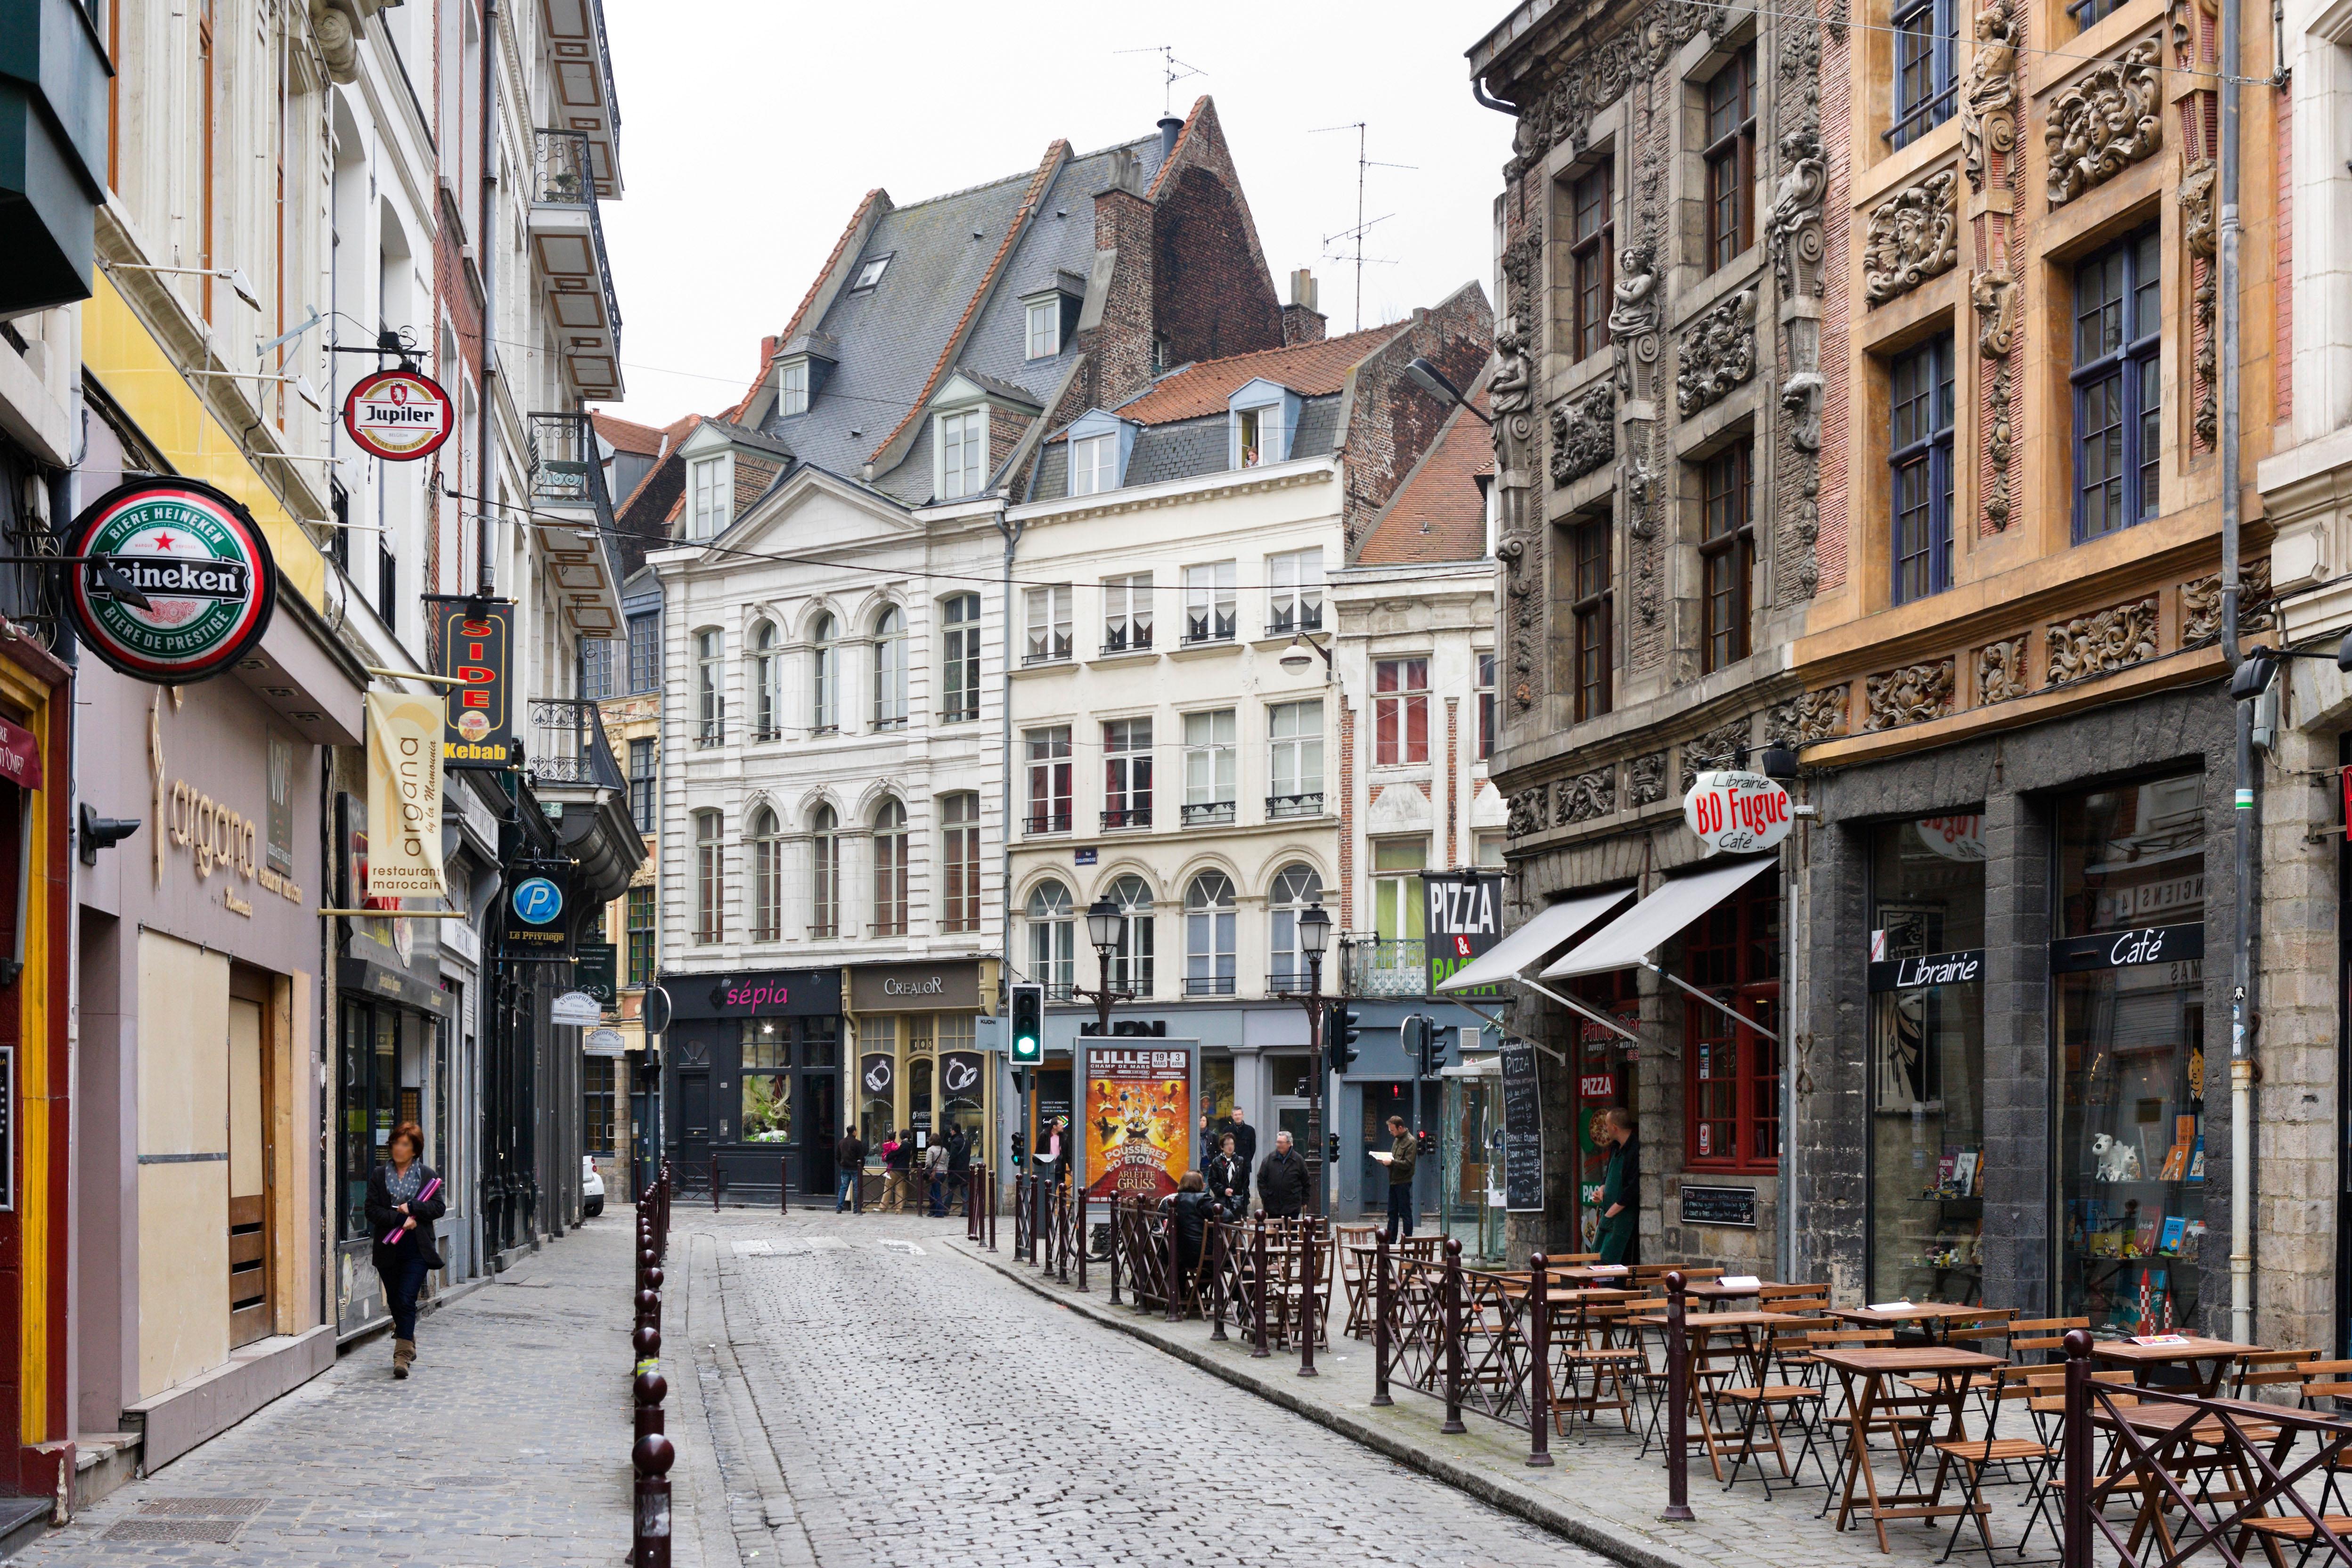 16 Best Hotels in Lille. Hotels from $25/night - KAYAK